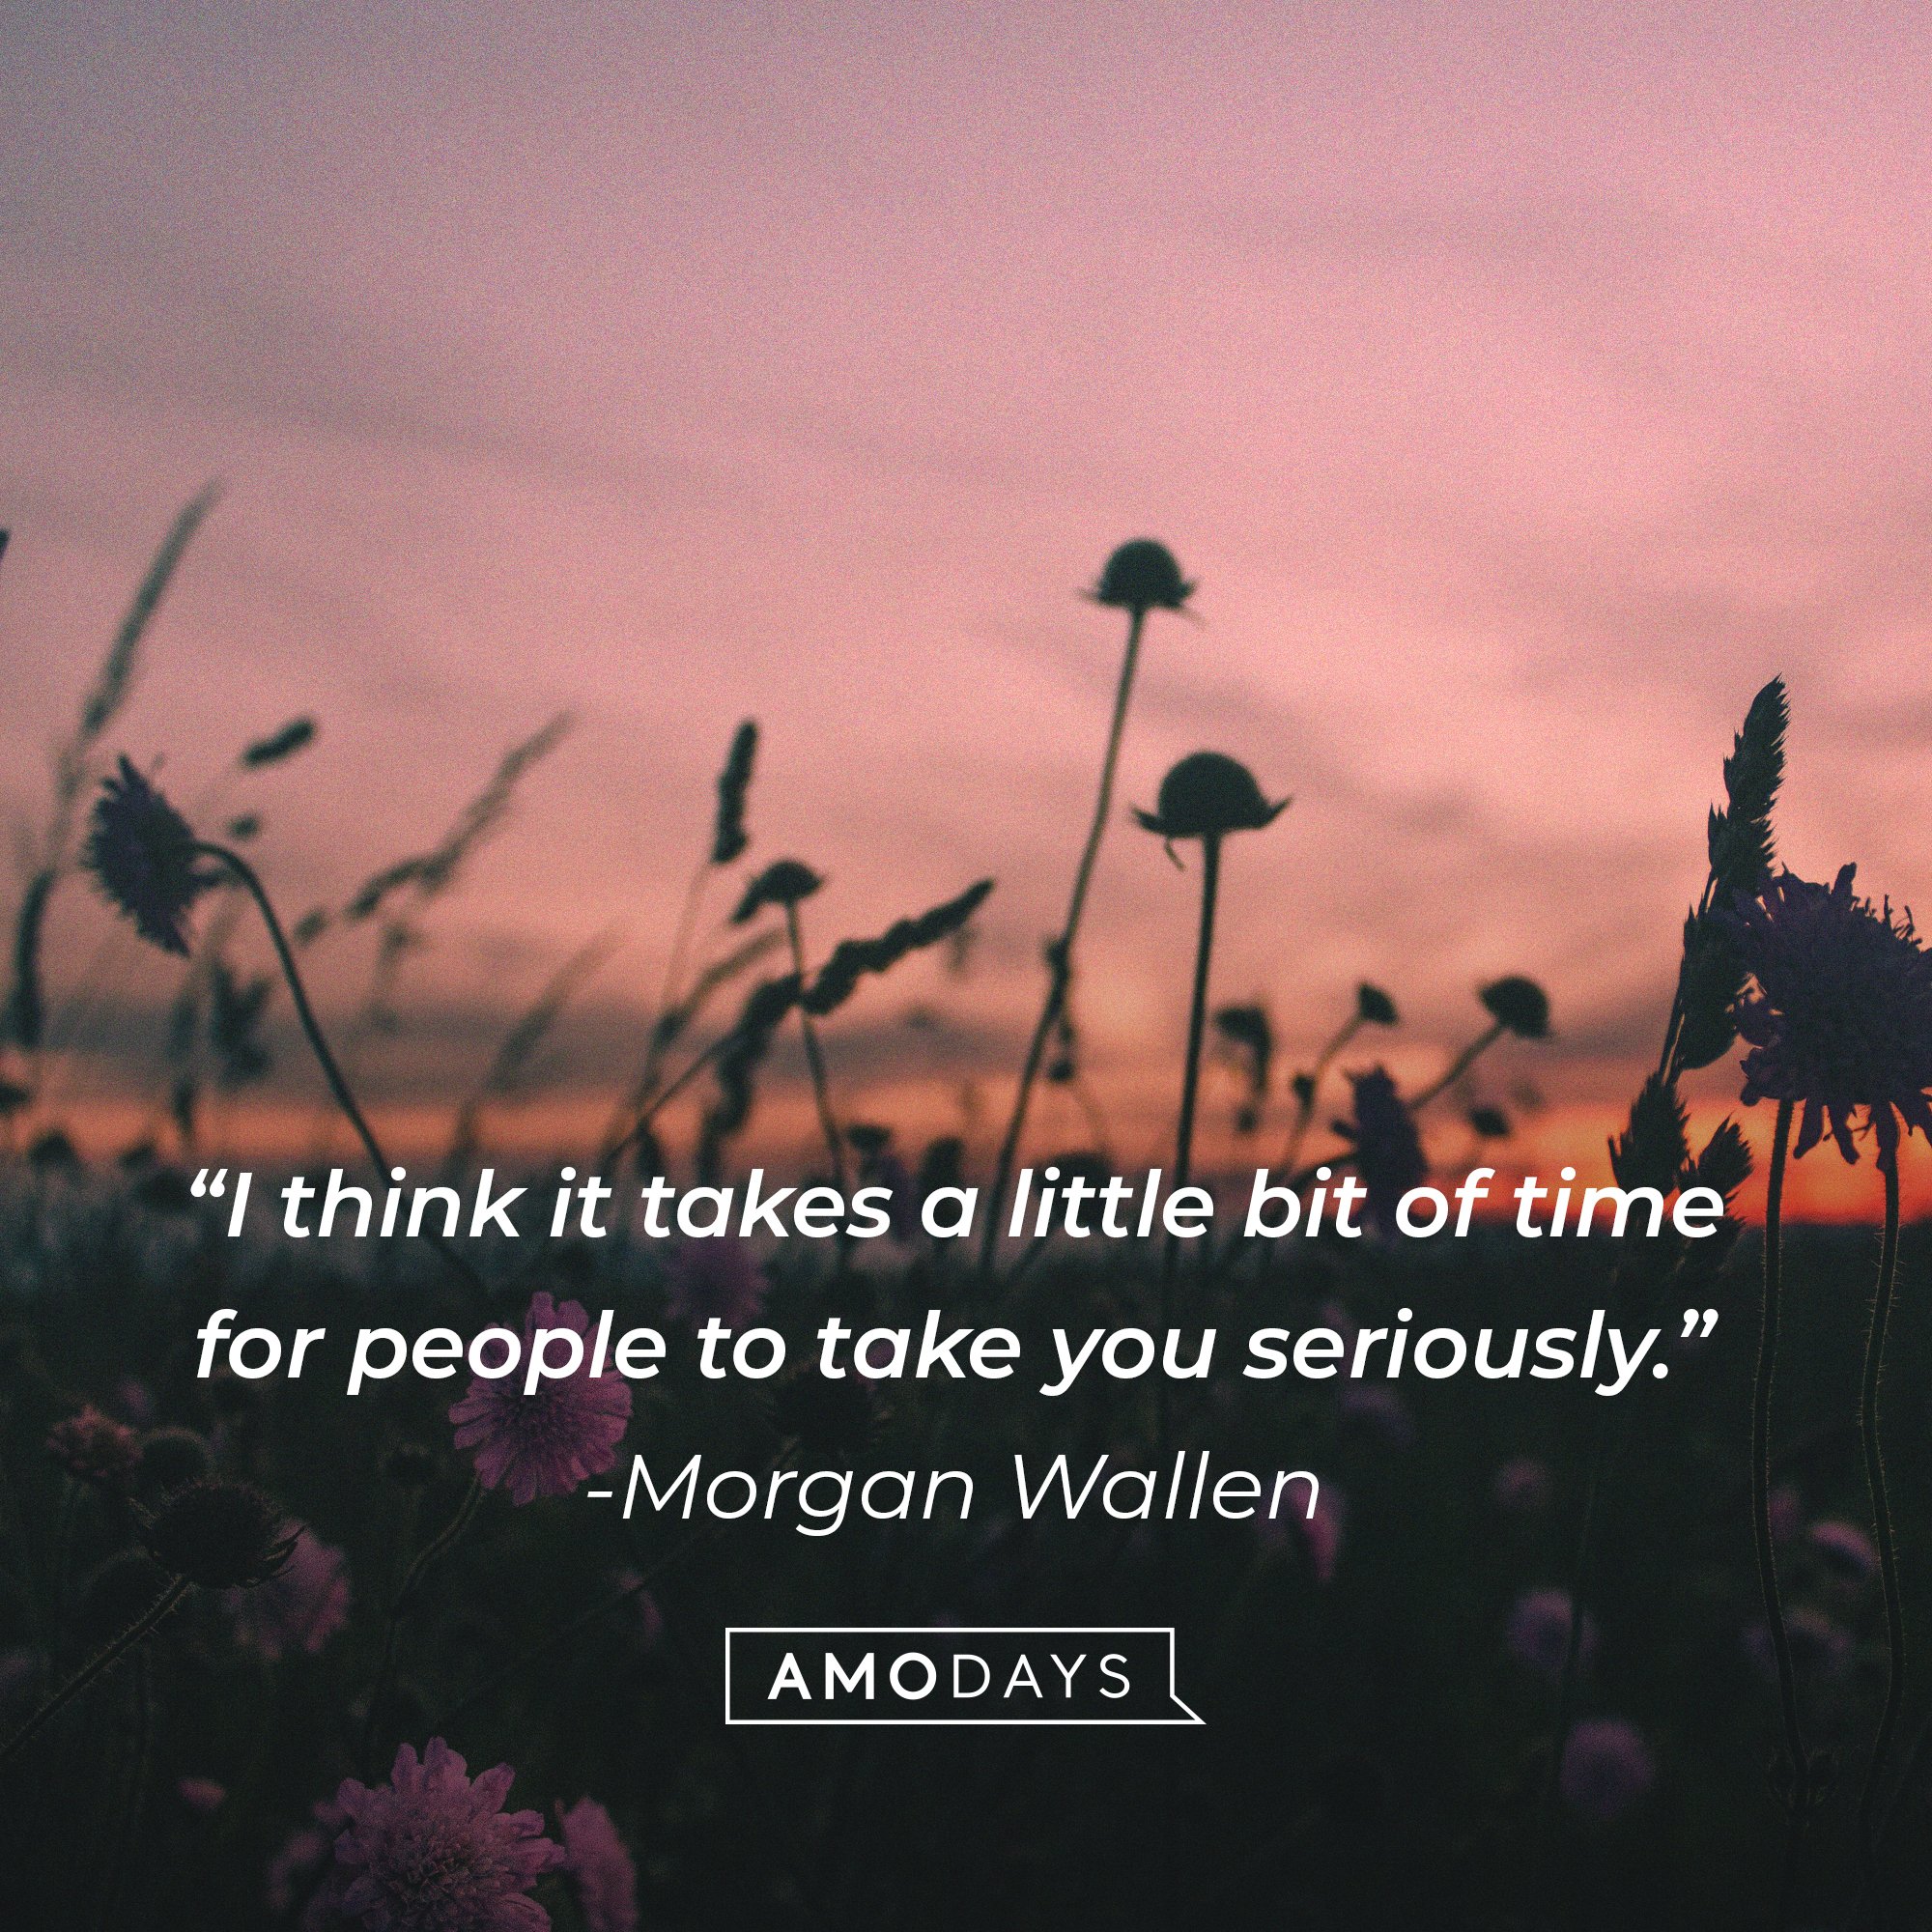  Morgan Wallen’s quote: “I think it takes a little bit of time for people to take you seriously.” I Image: AmoDays